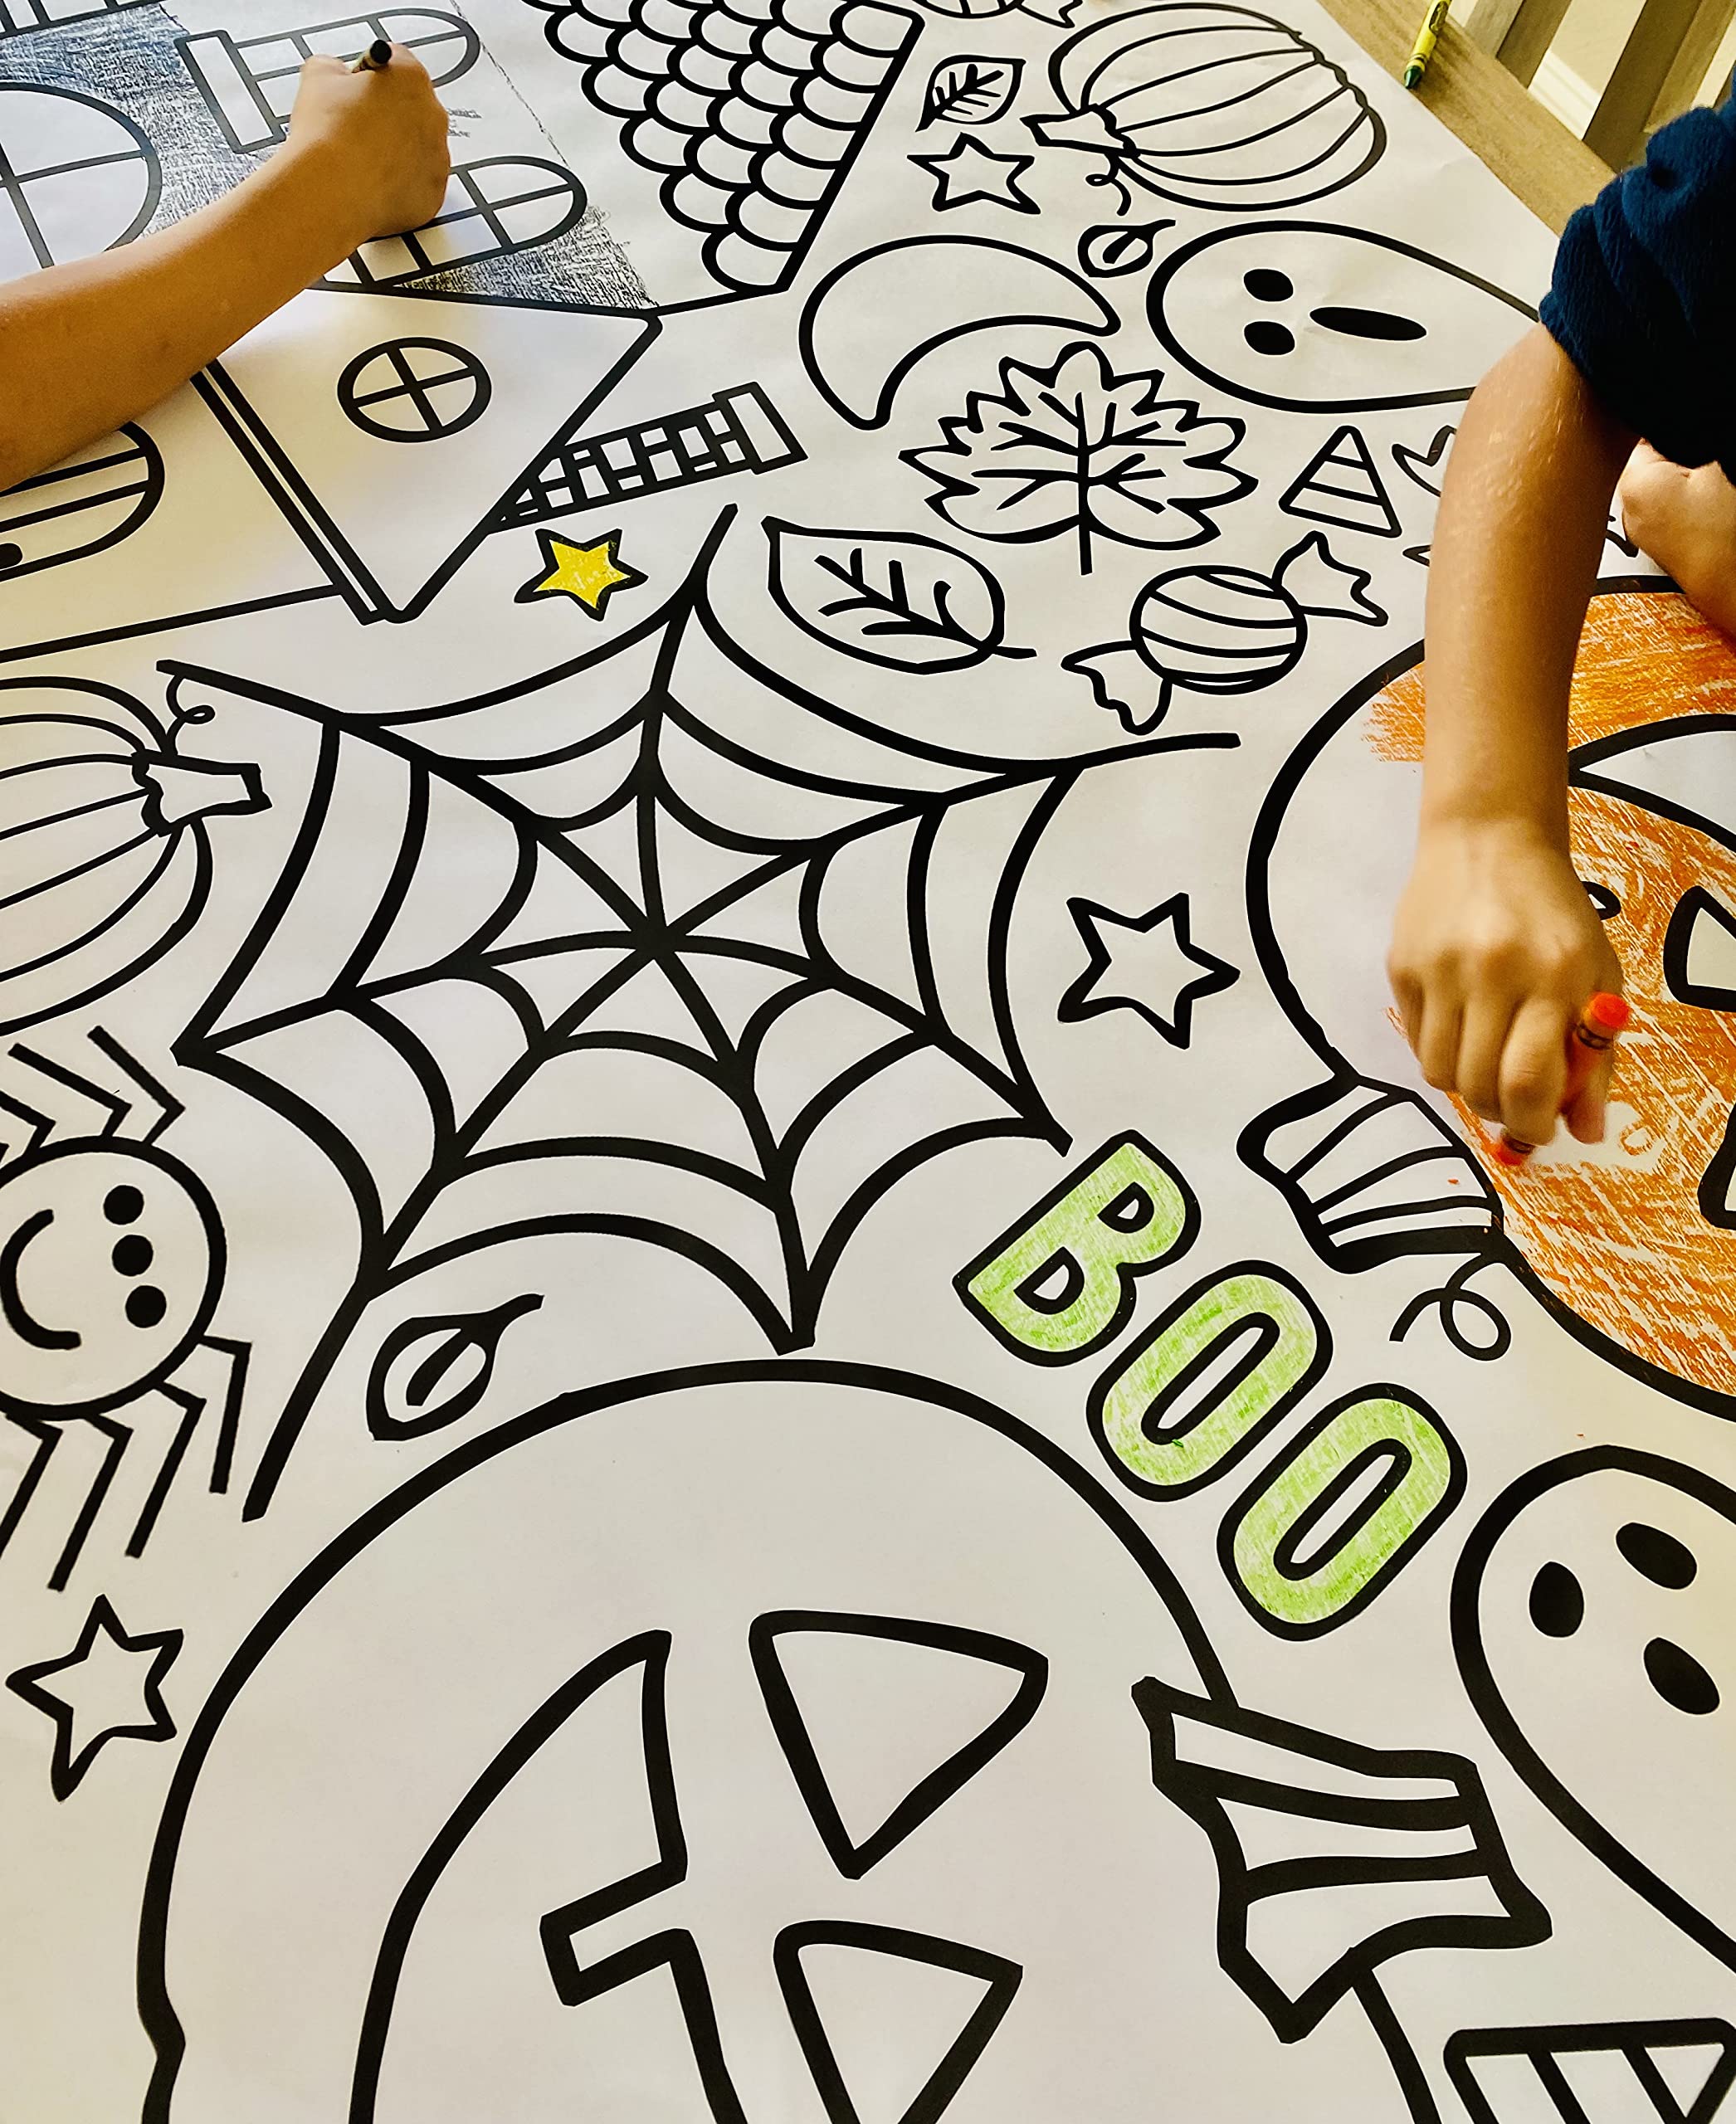 Tiny Expressions Giant Halloween Coloring Poster for Kids - 30 x 72 Inches Jumbo Paper Banner or Table Cover for School Parties or Events